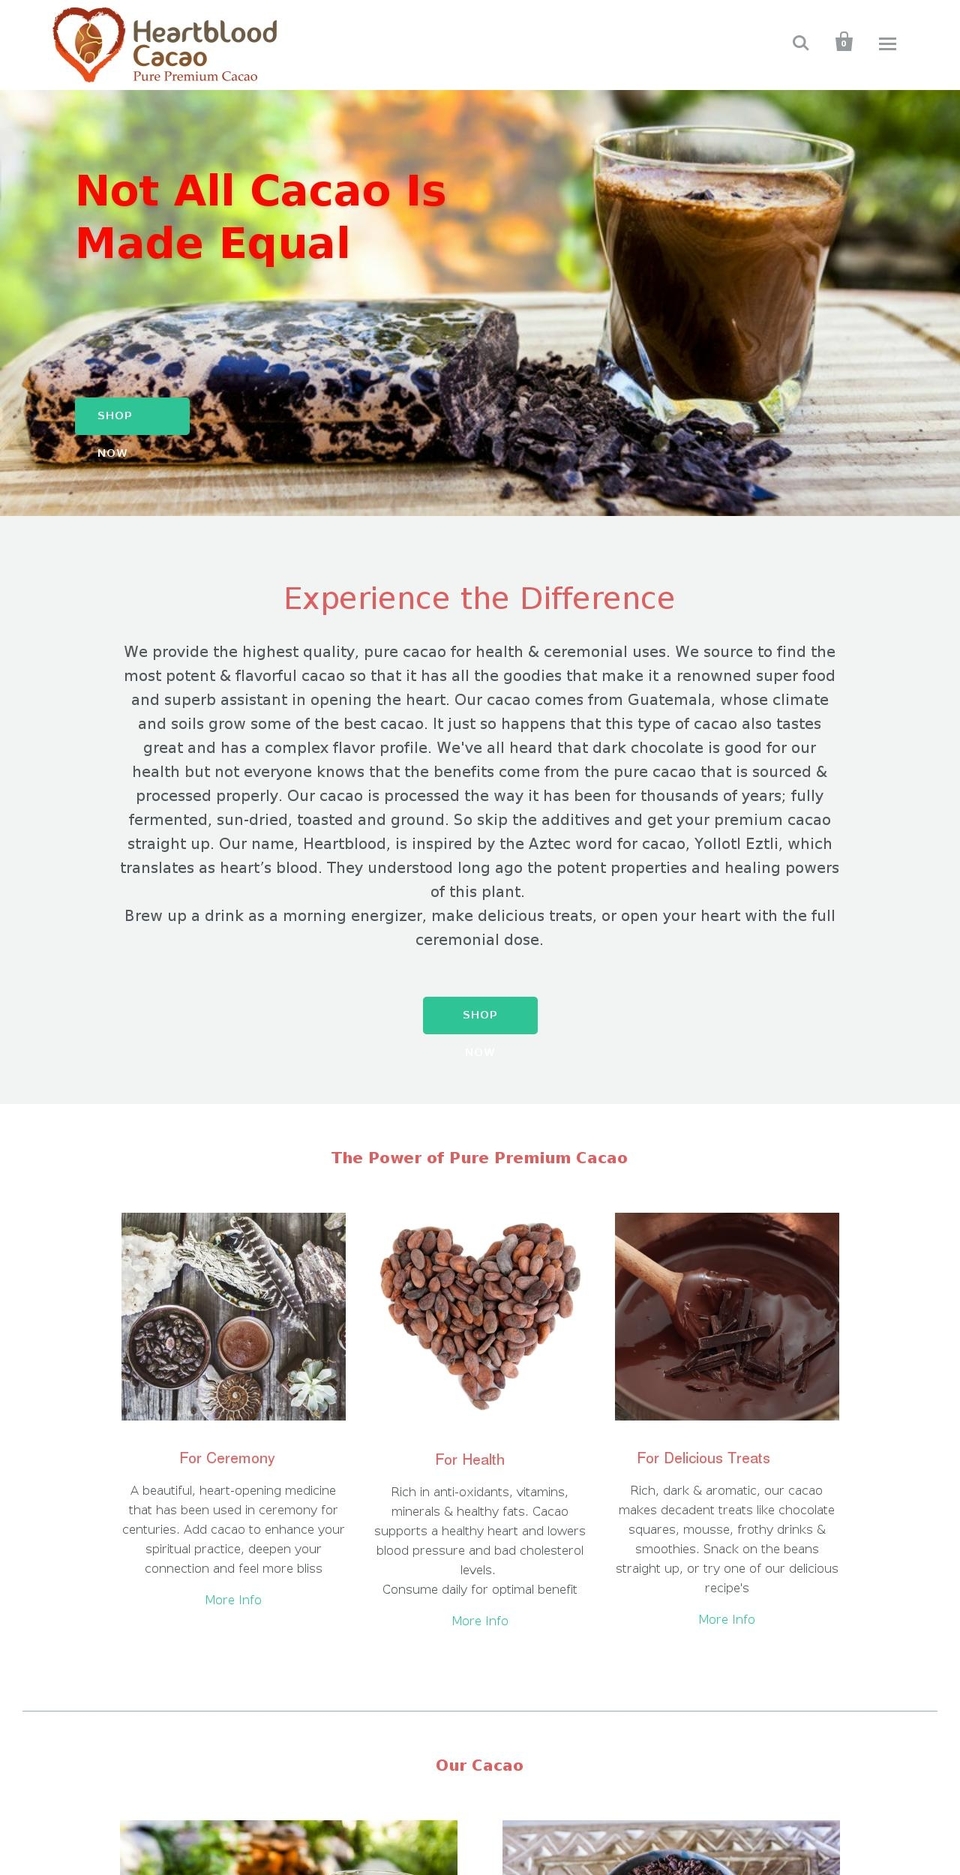 Startup Shopify theme site example heartbloodcacao.com